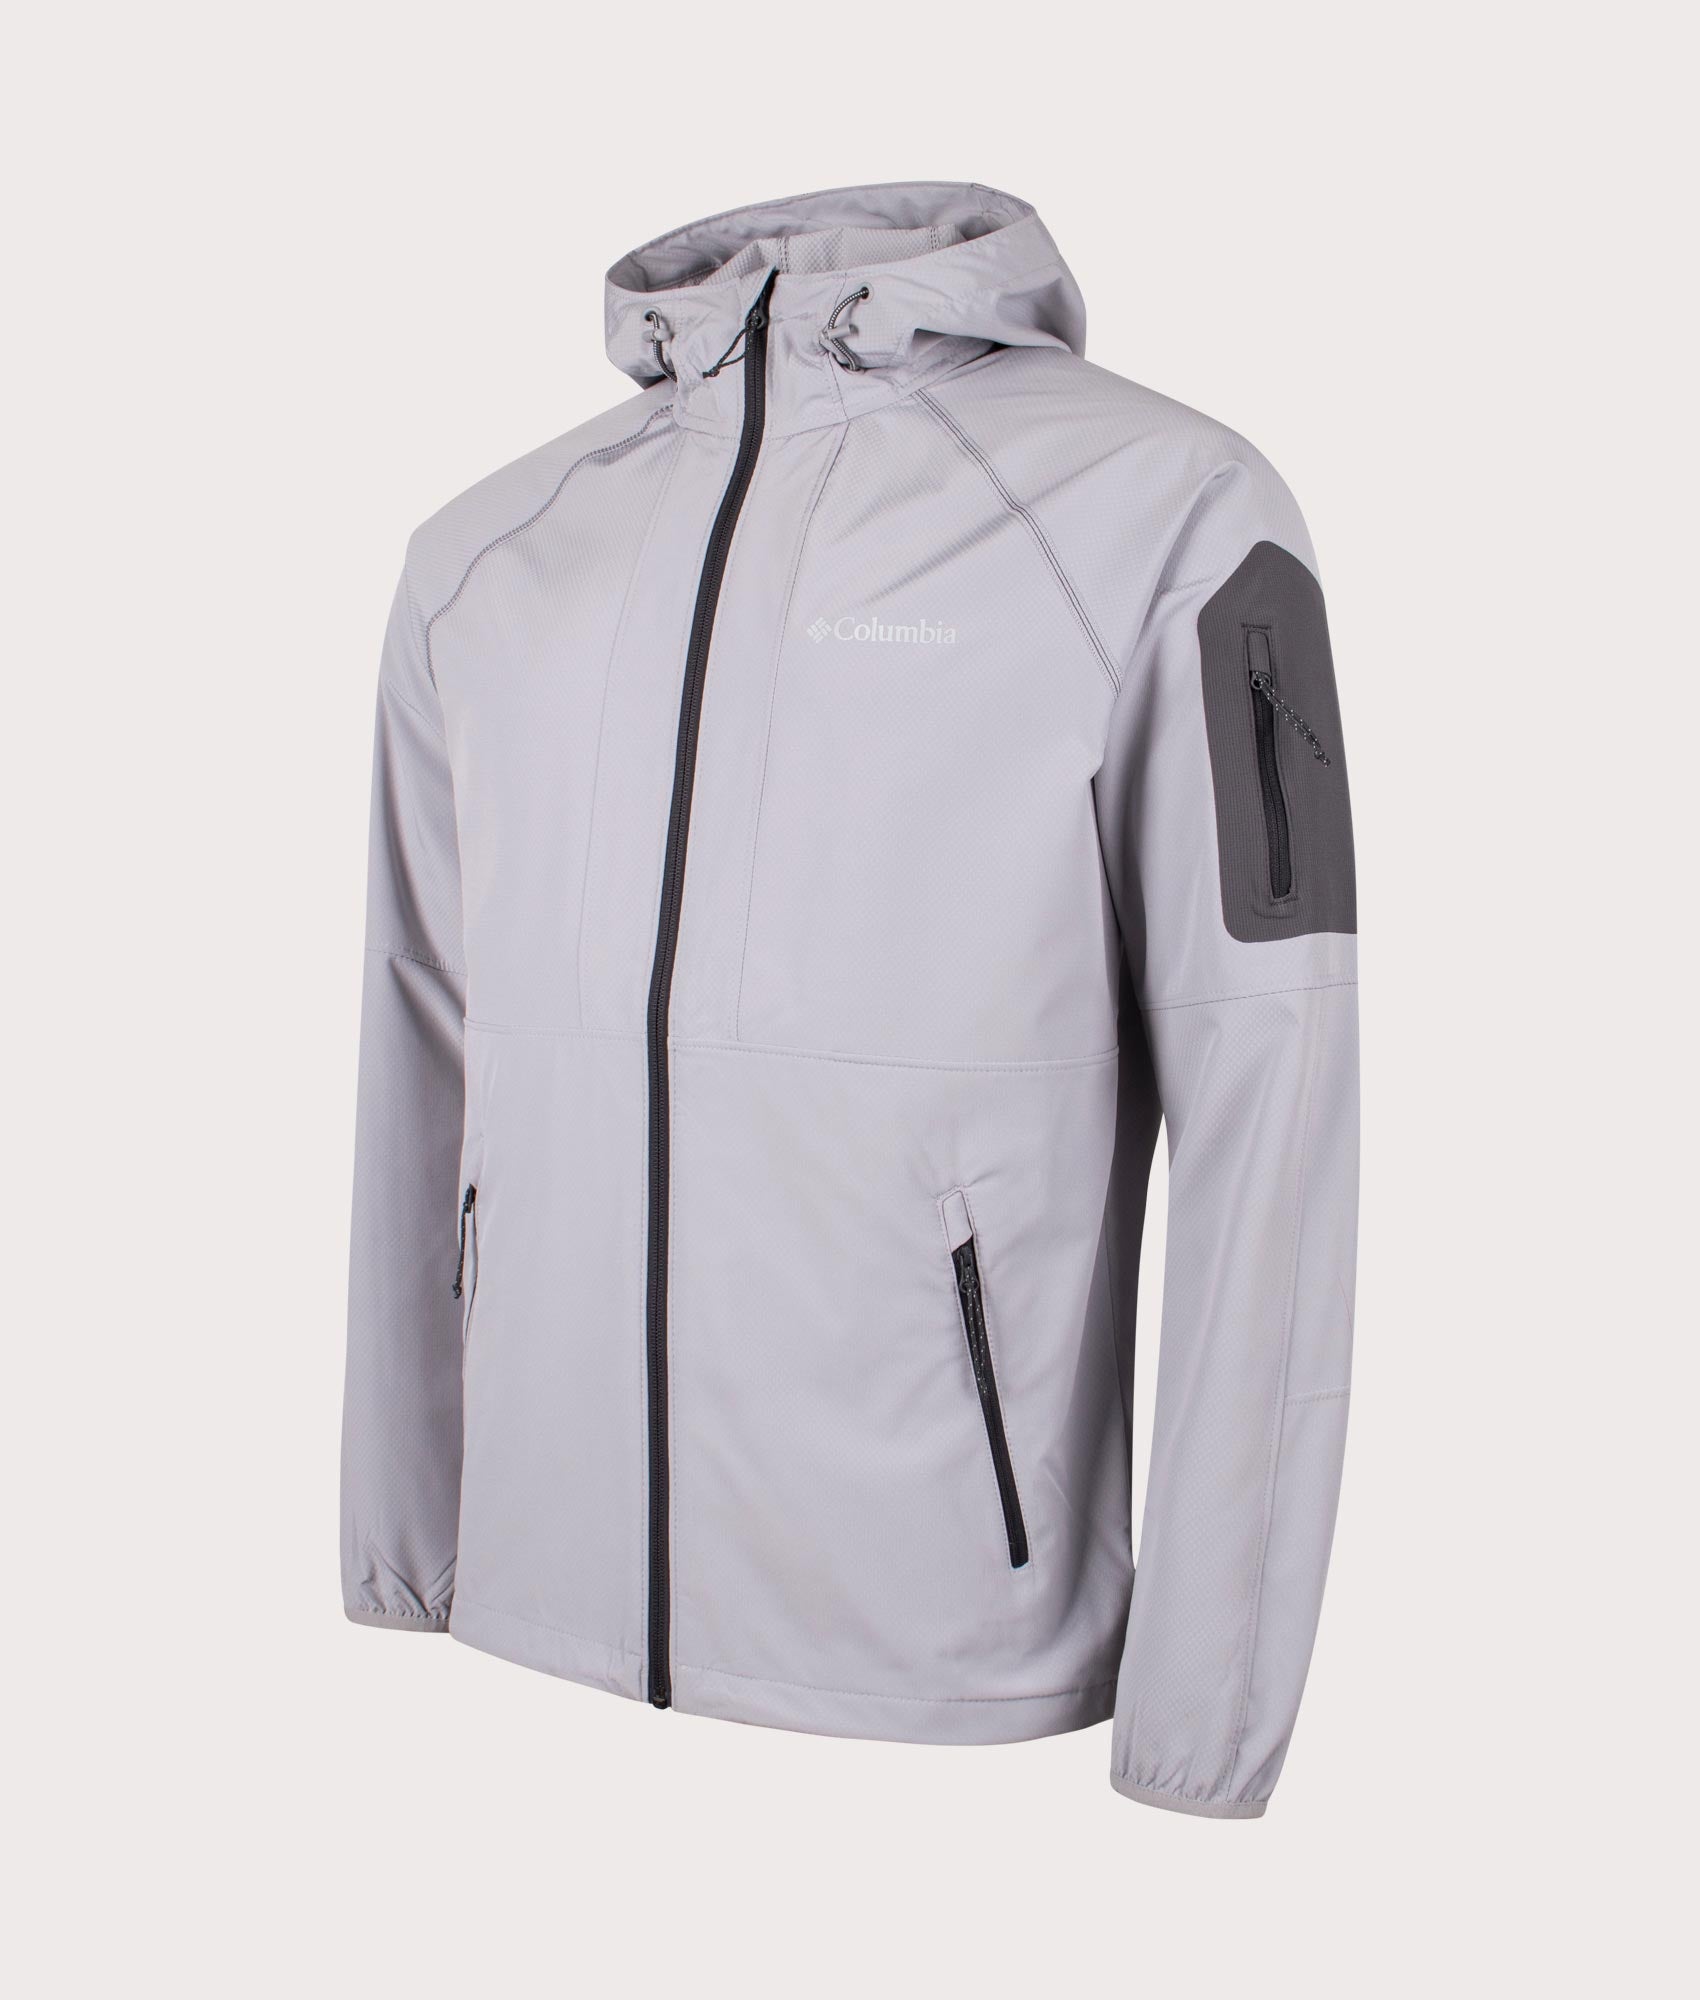 Columbia Mens Tall Heights Hooded Softshell Jacket - Colour: 039 Columbia Grey - Size: Large